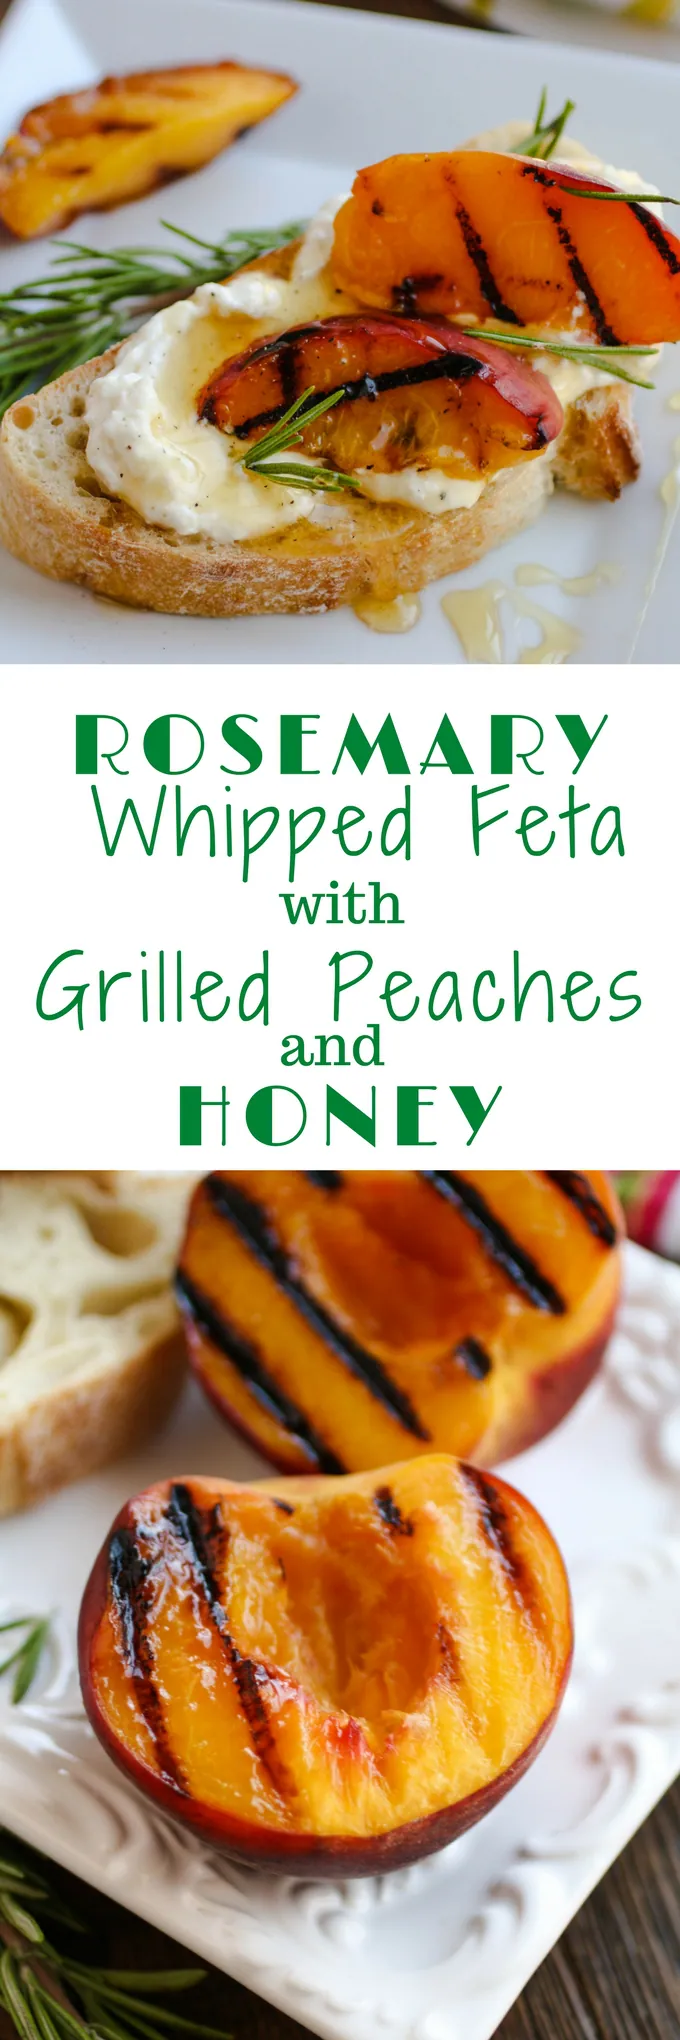 Rosemary Whipped Feta with Grilled Peaches and Honey should be on your list for your next get together. This appetizer is quite a treat!